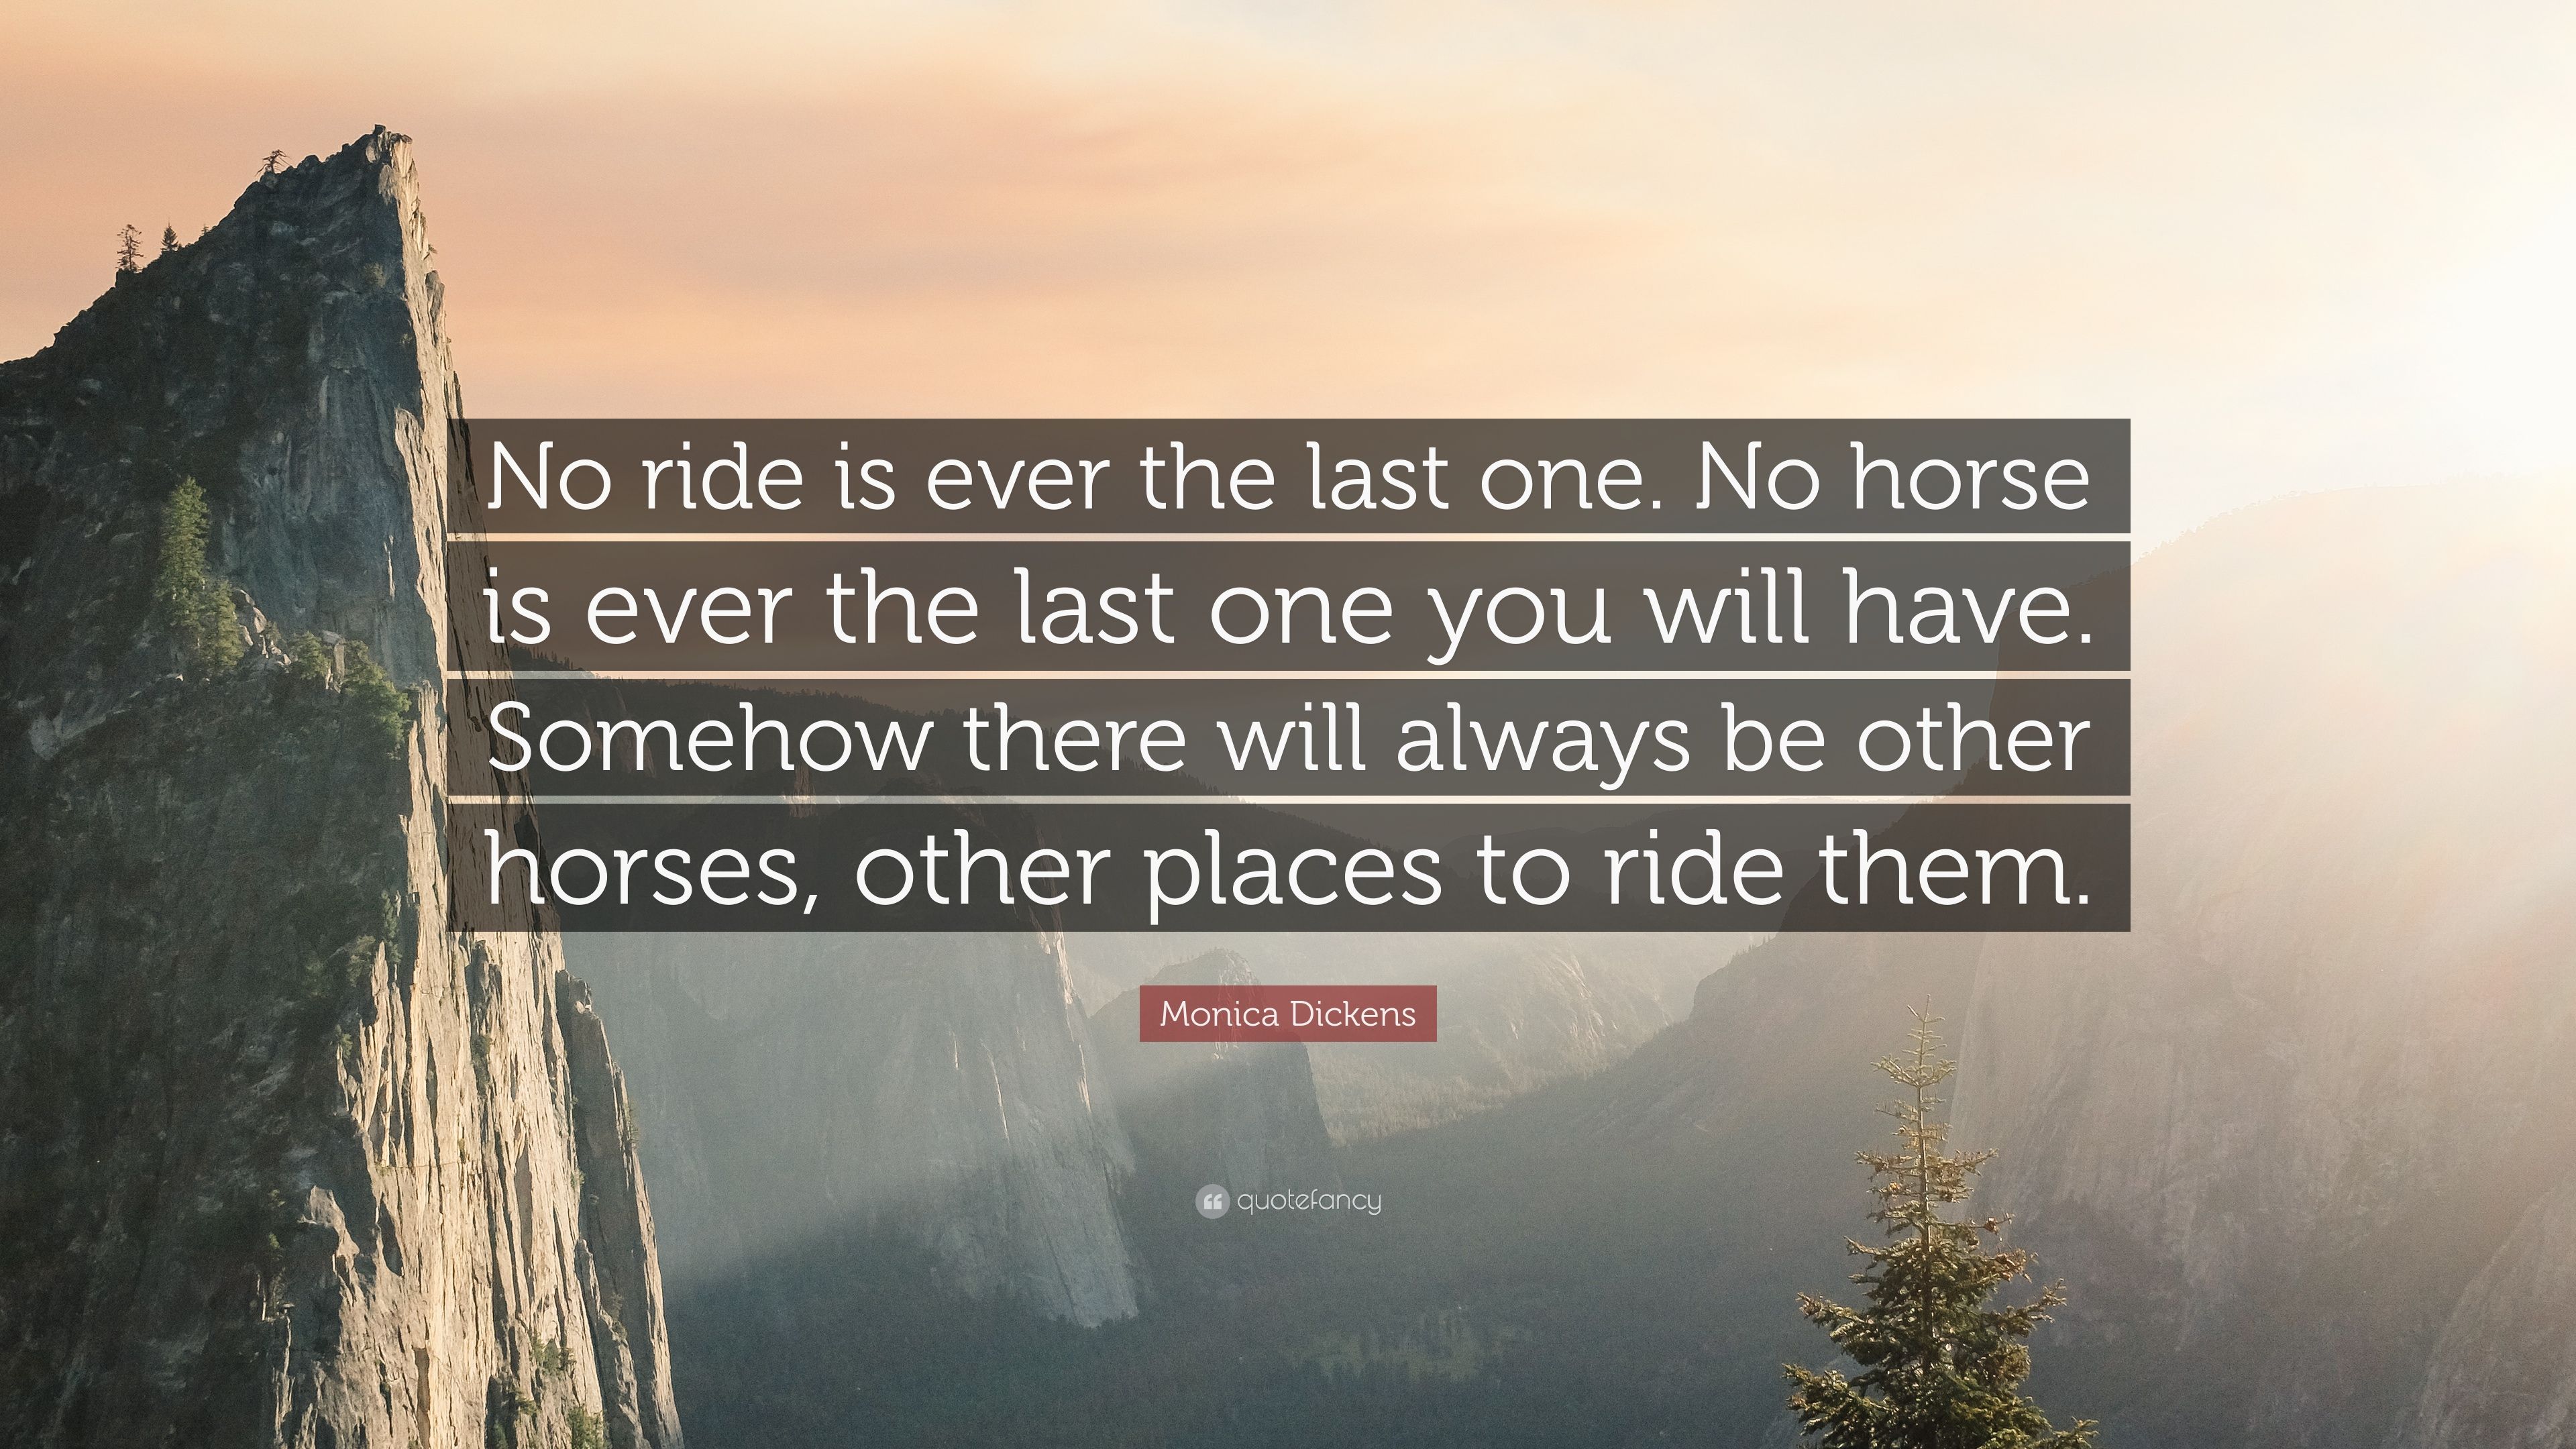 Monica Dickens Quote: “No ride is ever the last one. No horse is